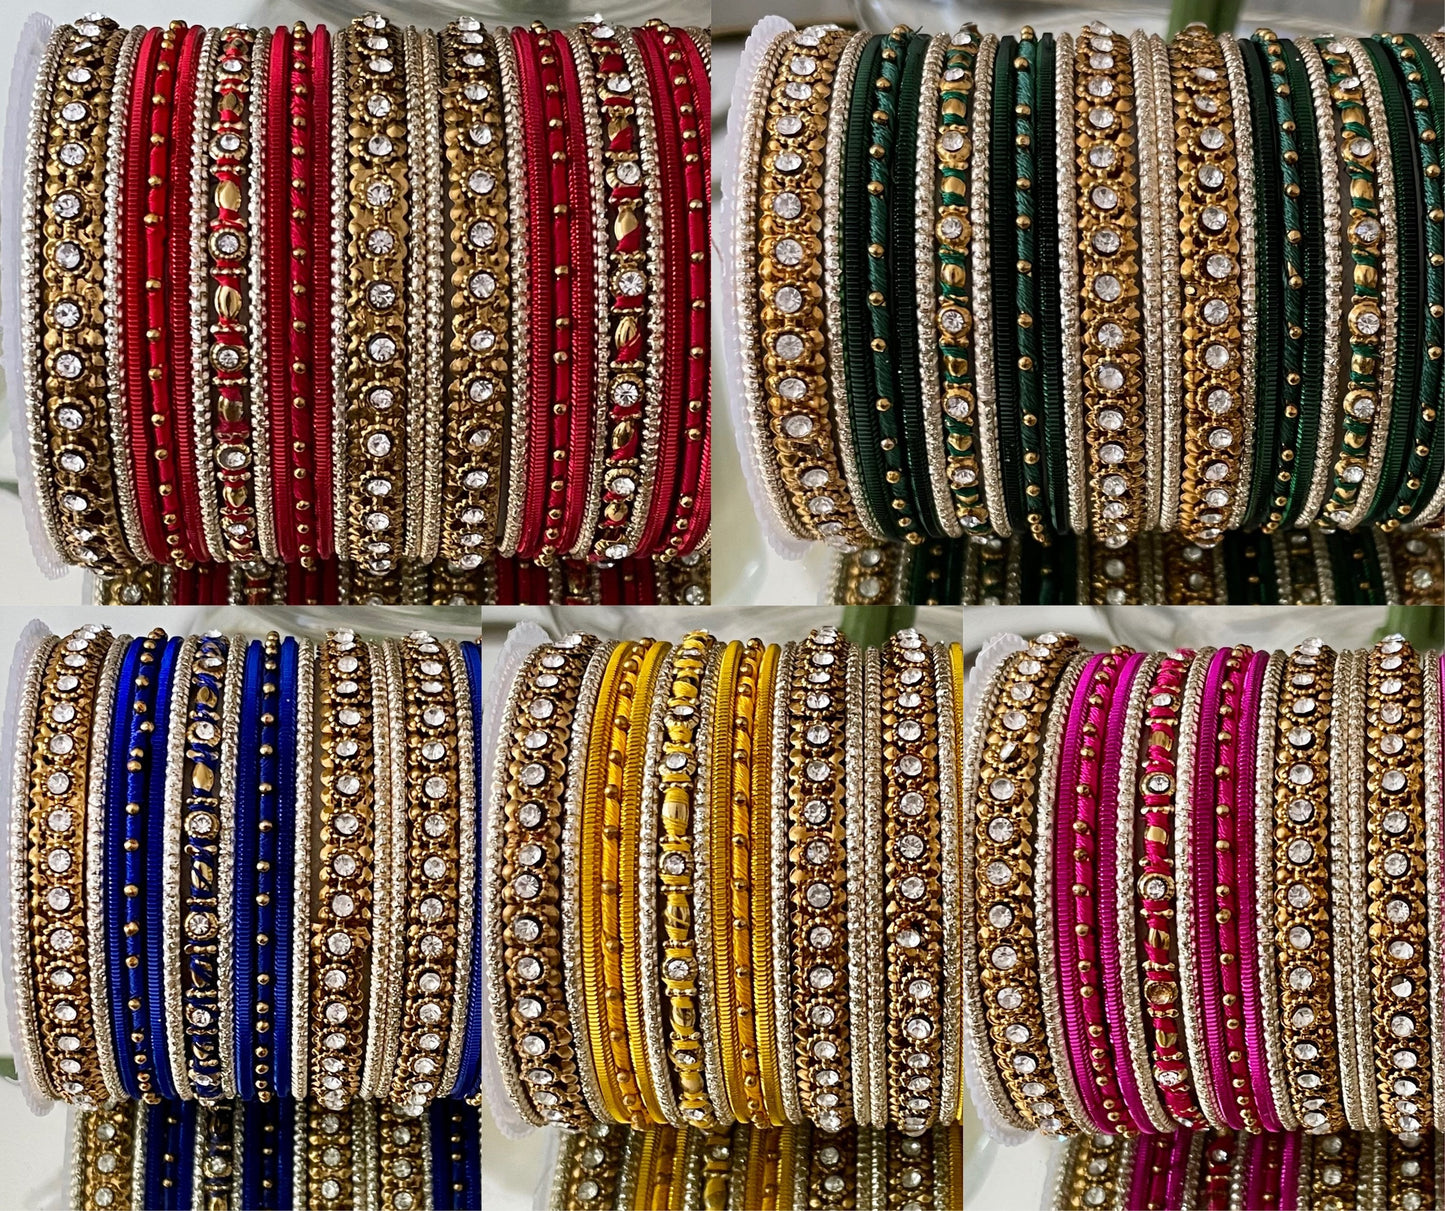 Bangle Stack for two hands| Thread Diamante Bangles Jewellery Bridal Bangle Stack Wedding| Indian Jewellery